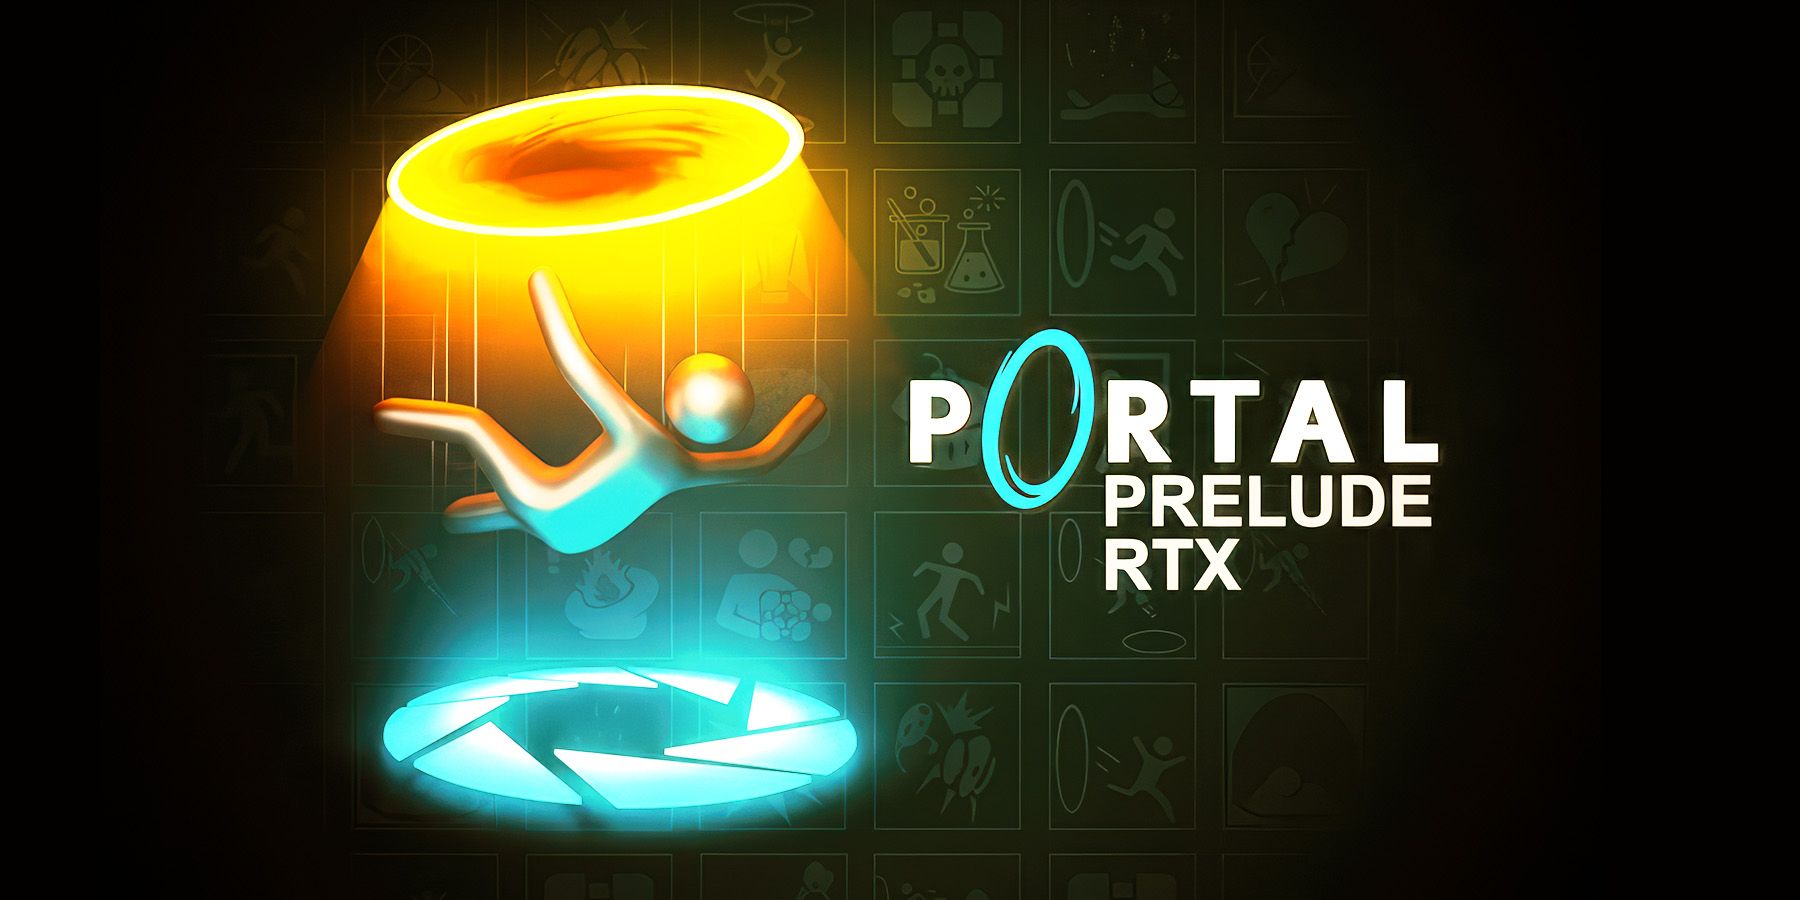 portal-prelude-mod-gets-rtx-remix-treatment-with-full-ray-tracing-dlss-3-more